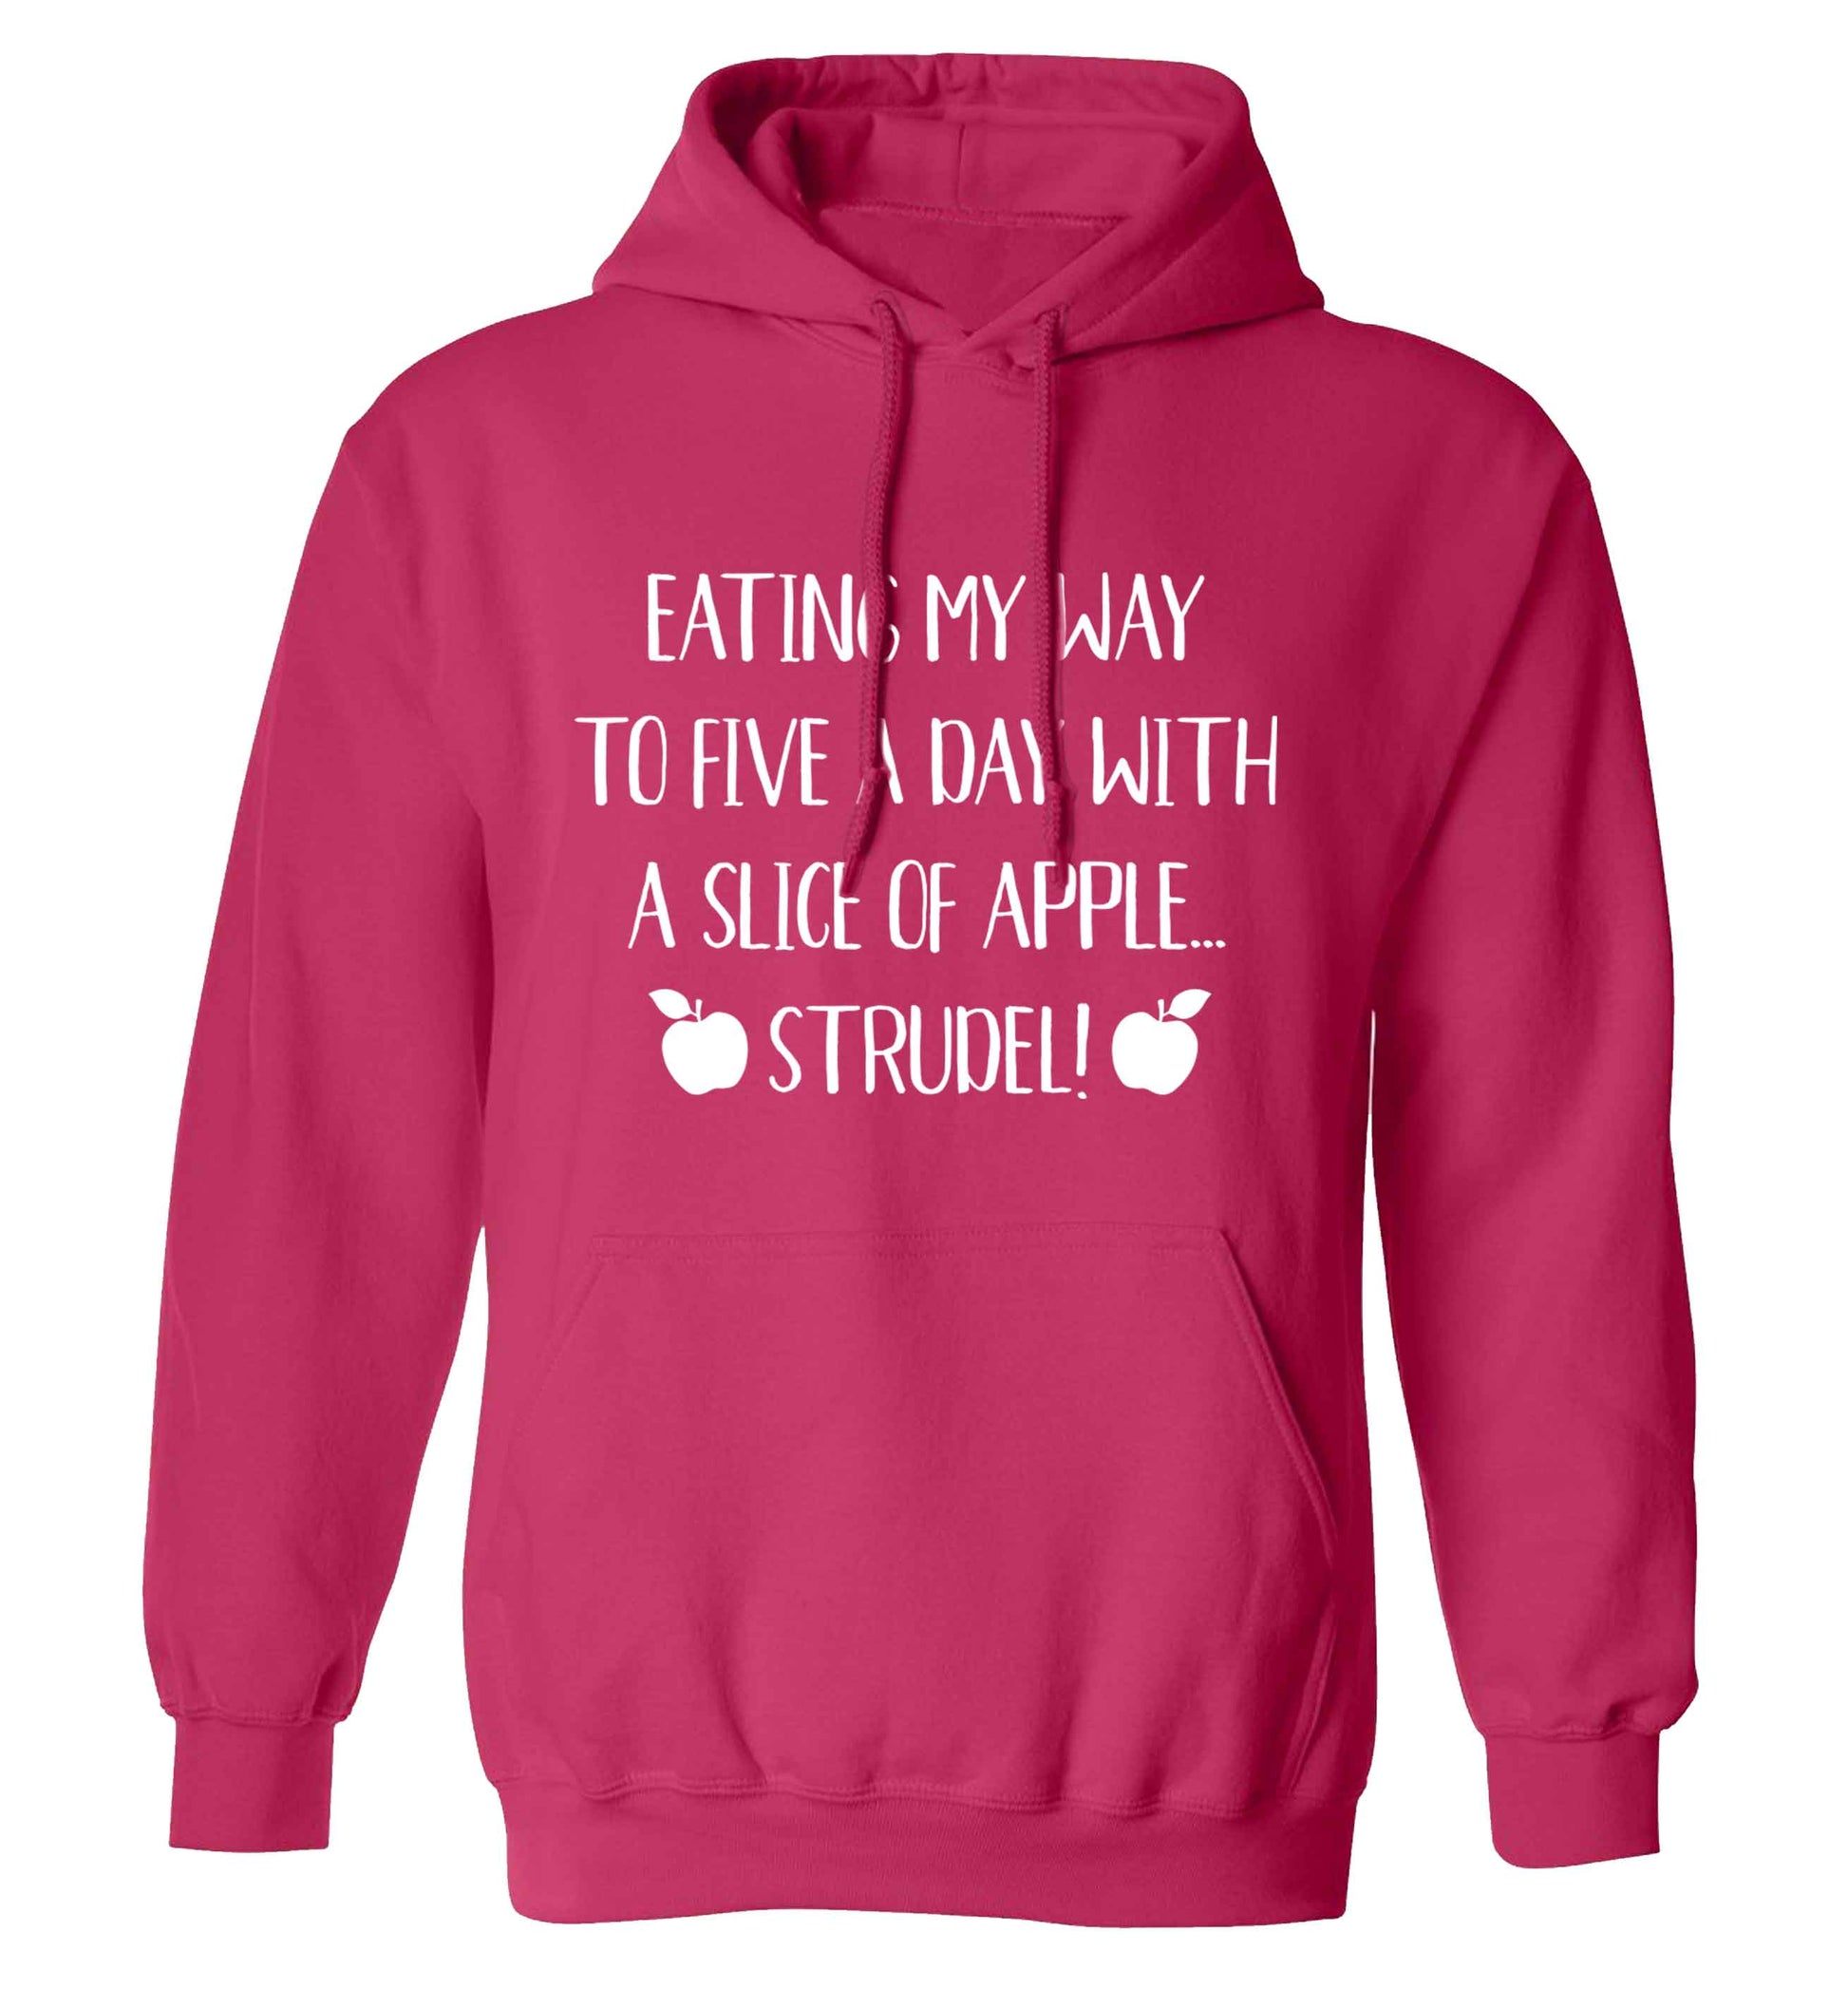 Eating my way to five a day with a slice of apple strudel adults unisex pink hoodie 2XL